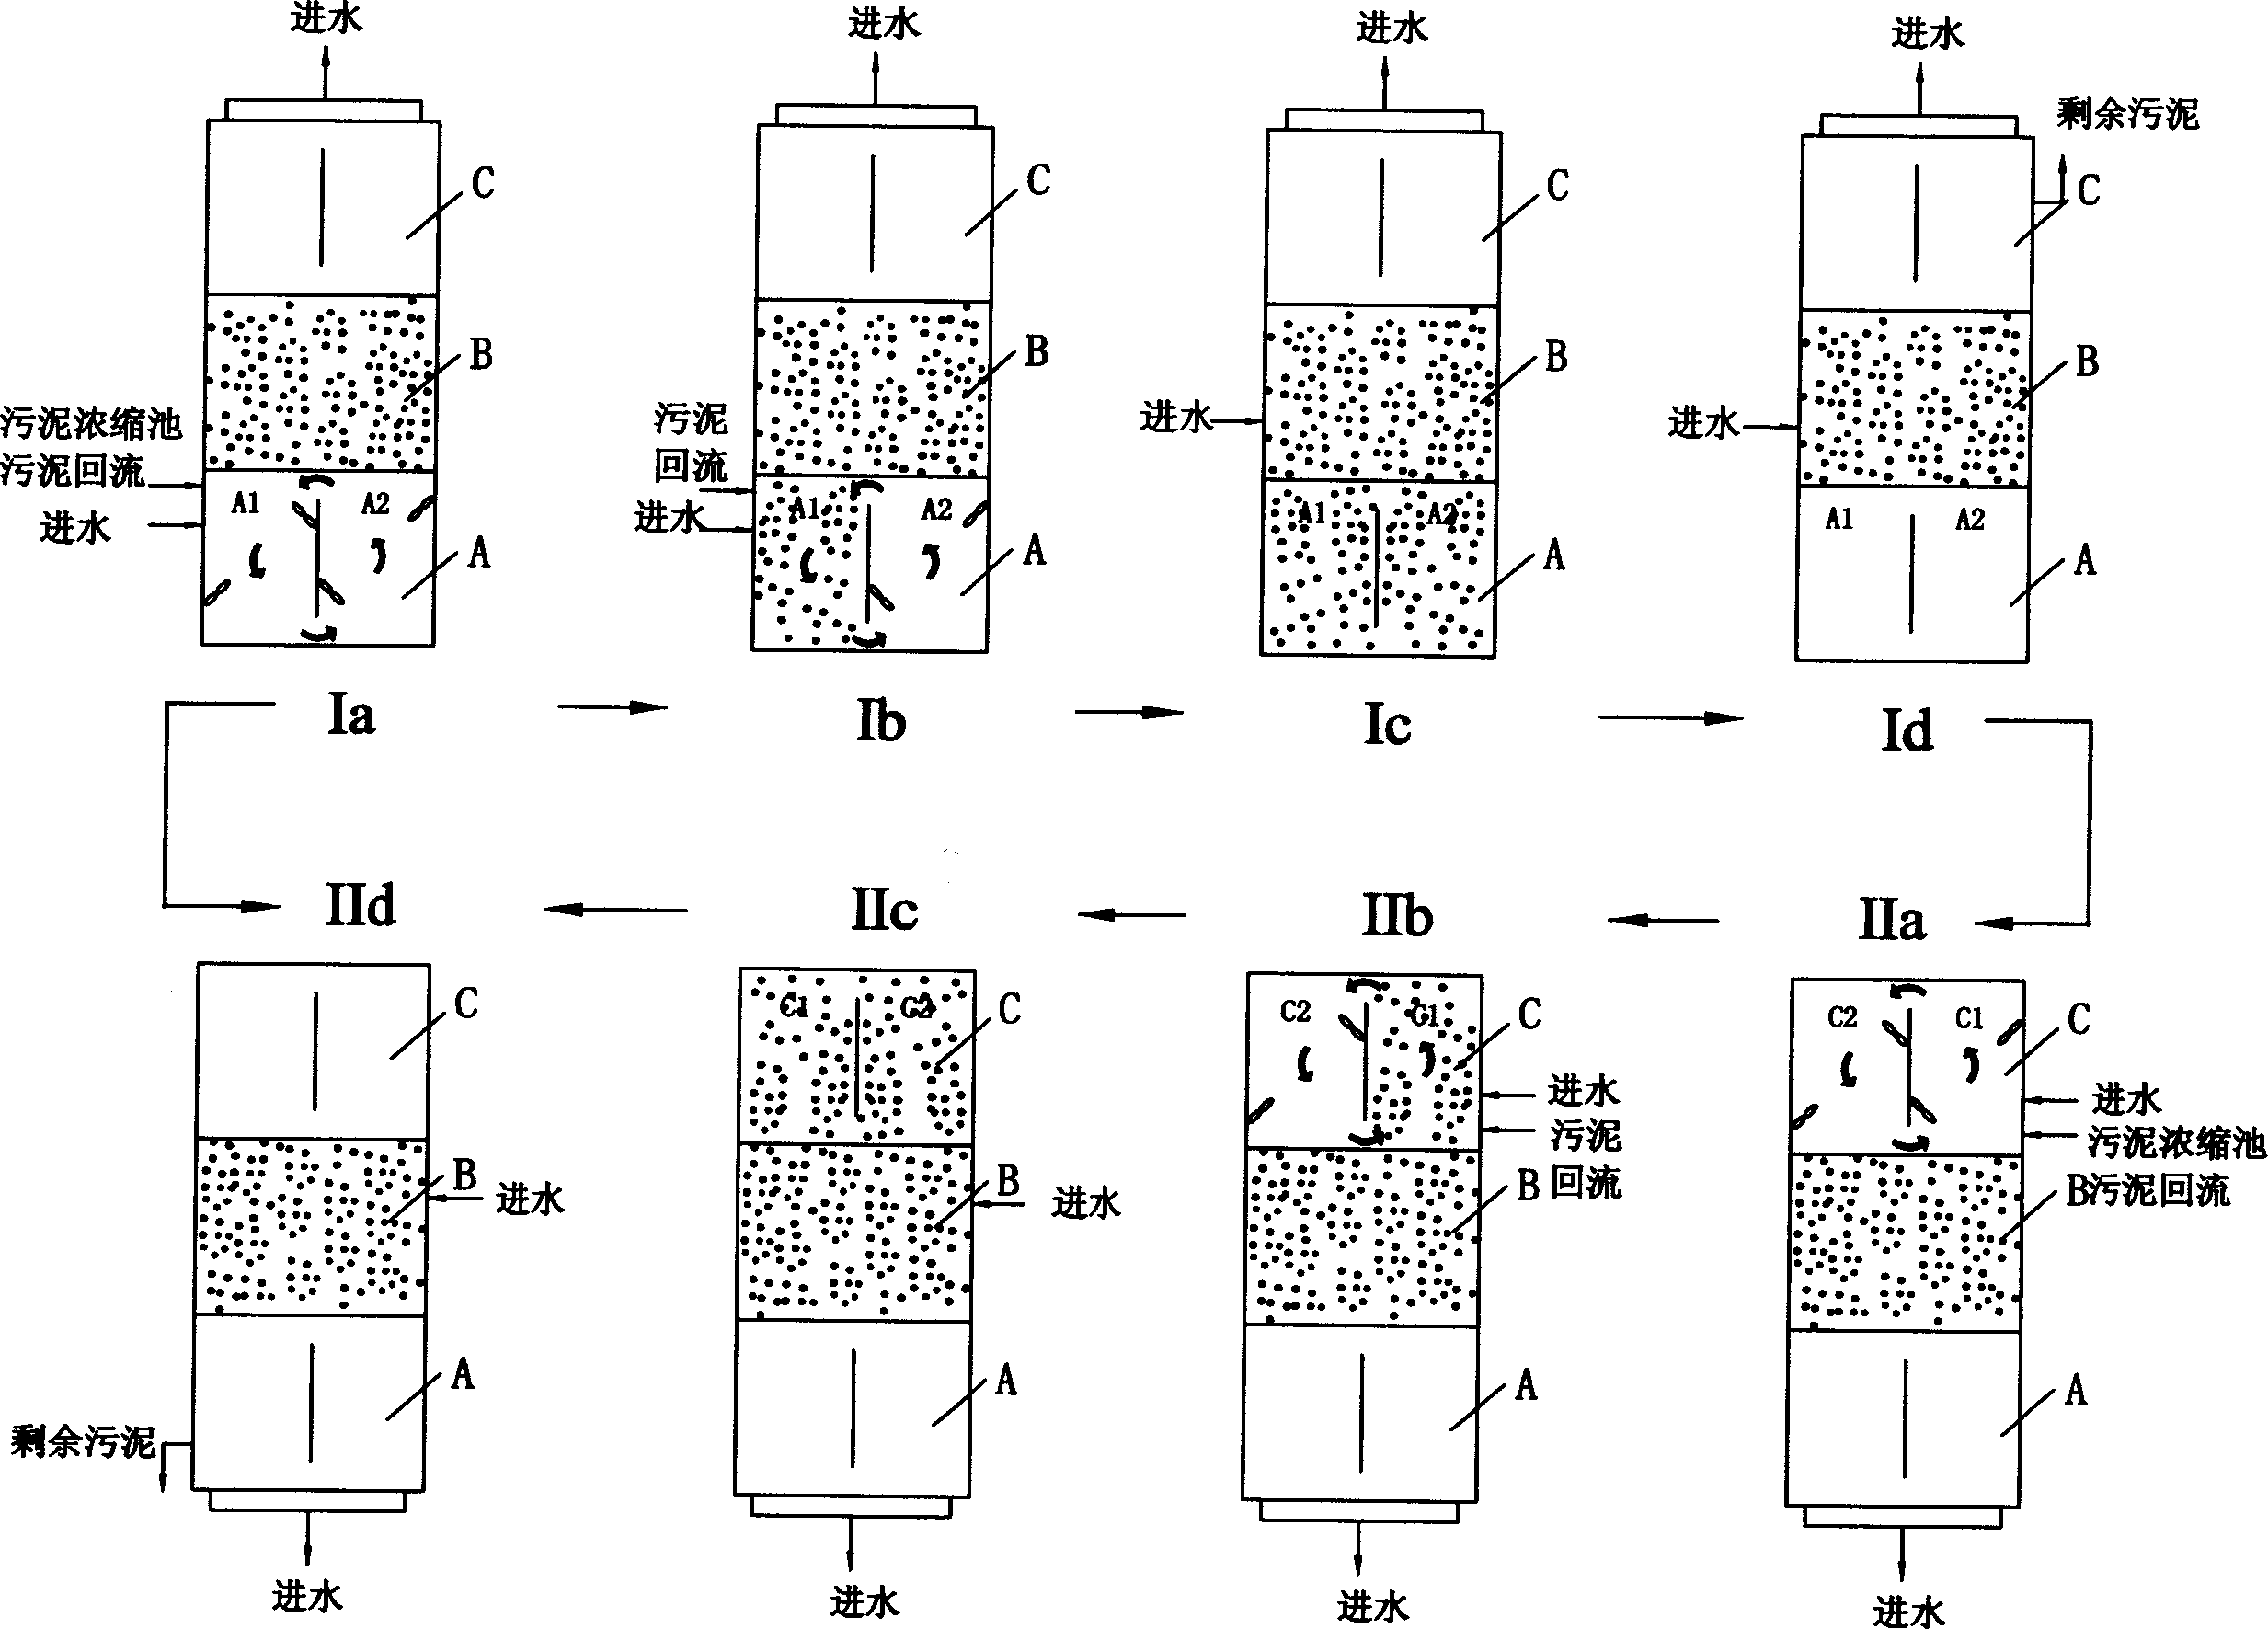 Improved type alternated technique for wastewater treatment of activated sludge process and equipment